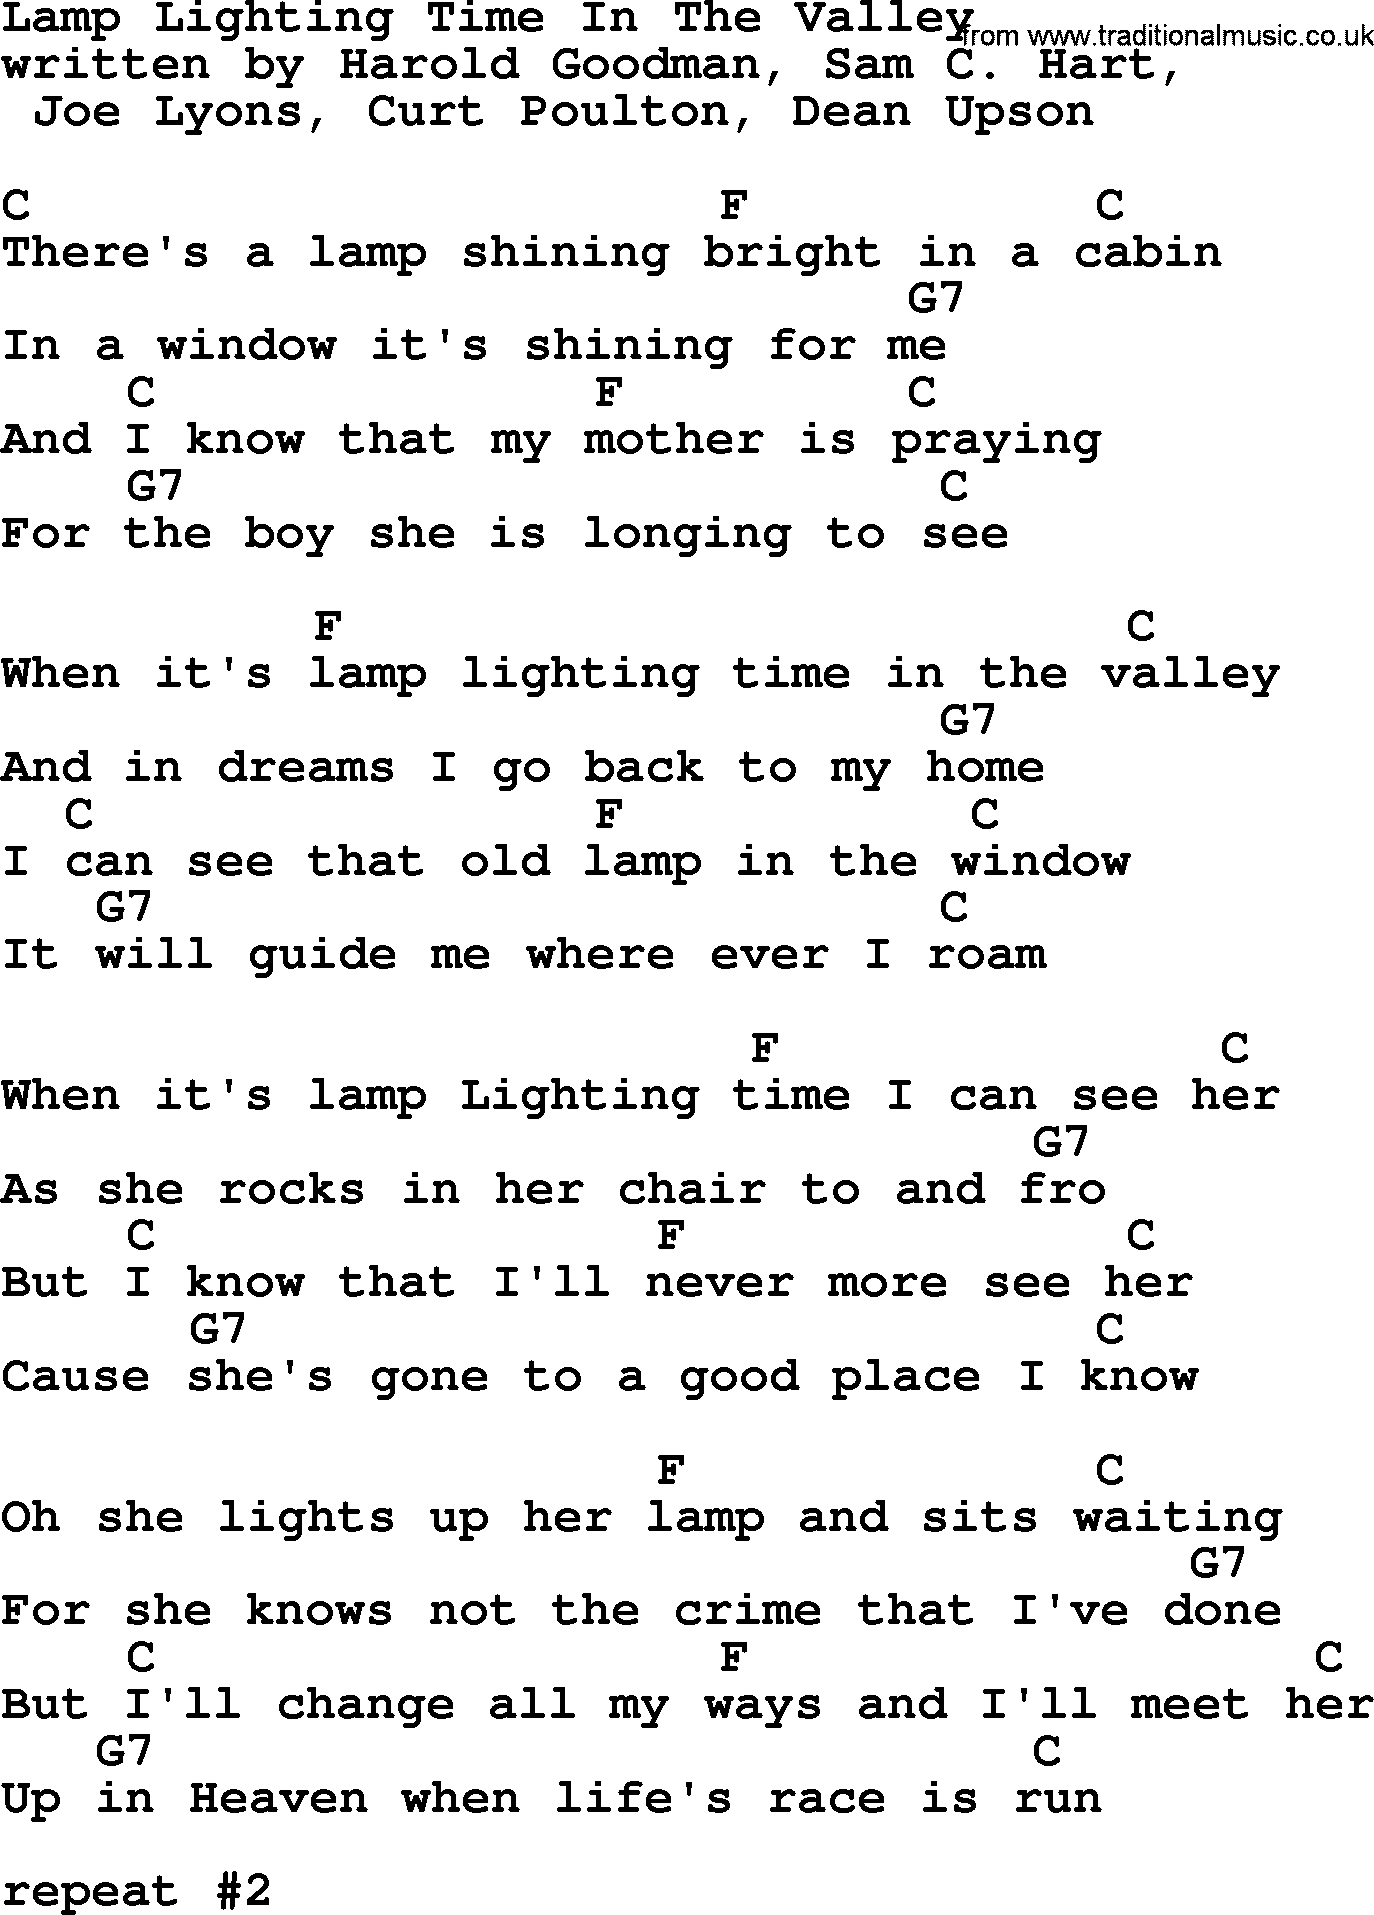 Marty Robbins song: Lamp Lighting Time In The Valley, lyrics and chords